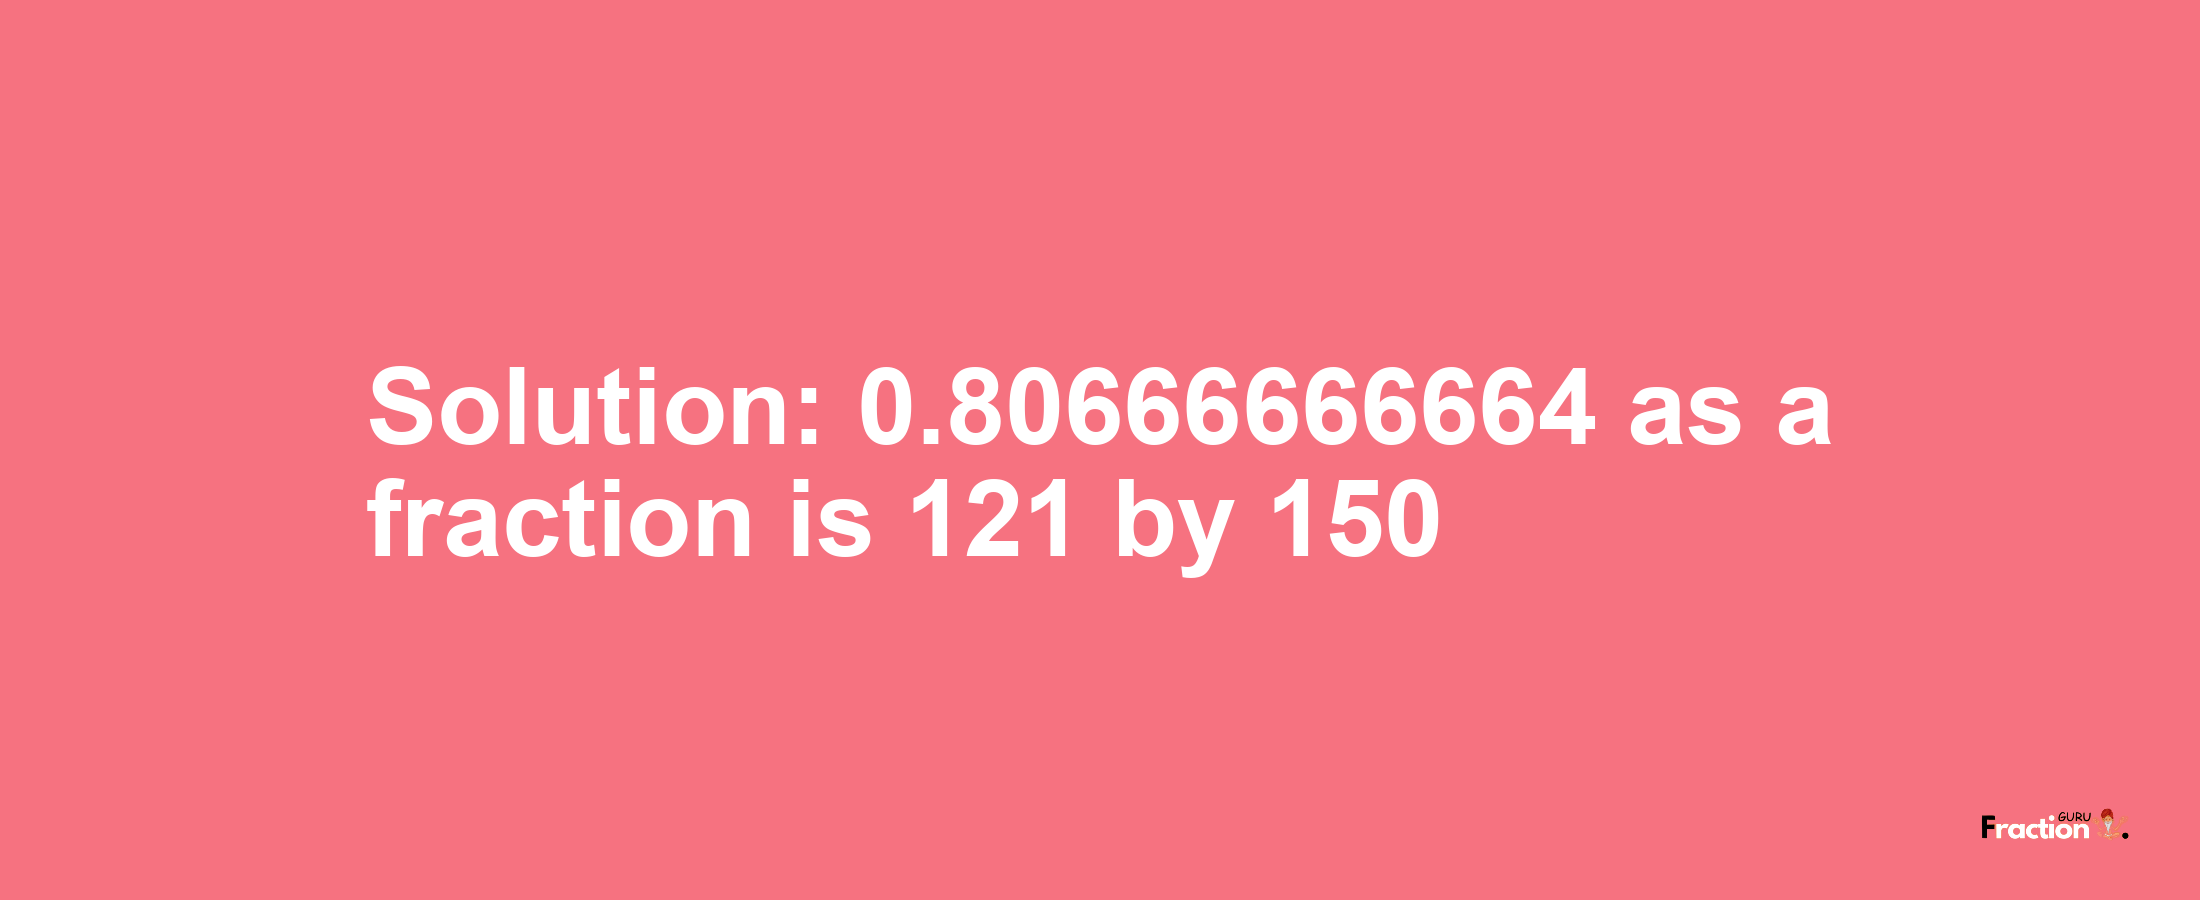 Solution:0.80666666664 as a fraction is 121/150